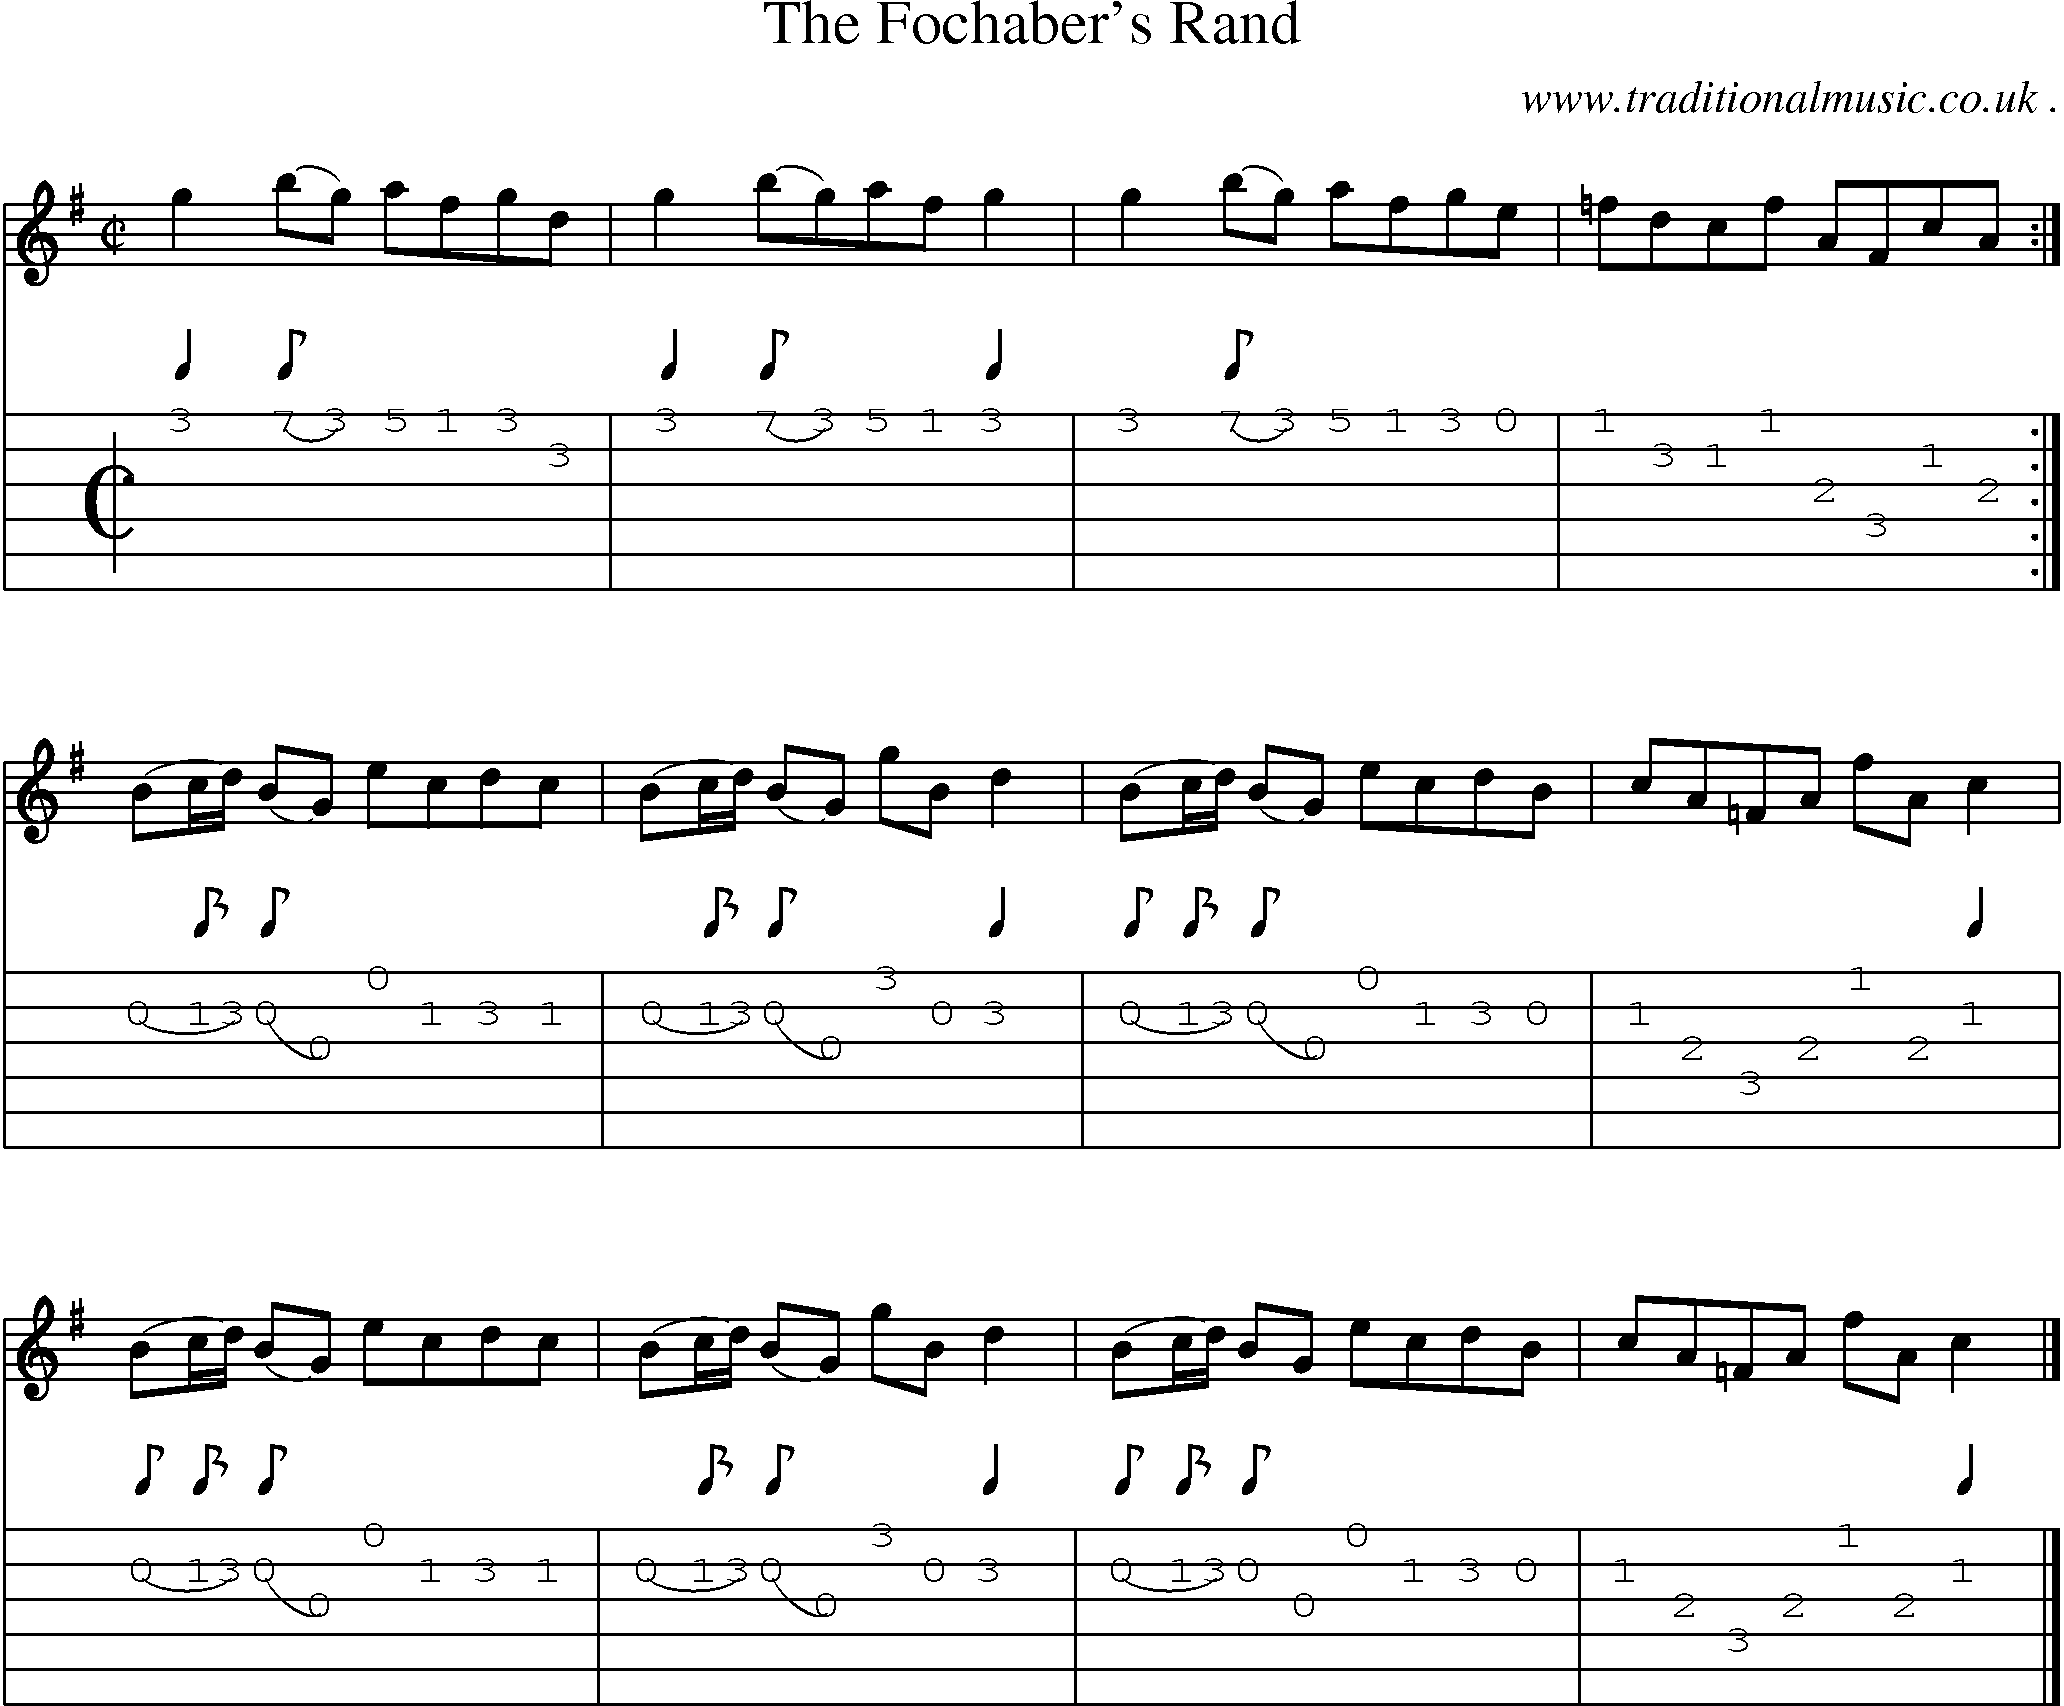 Sheet-music  score, Chords and Guitar Tabs for The Fochabers Rand